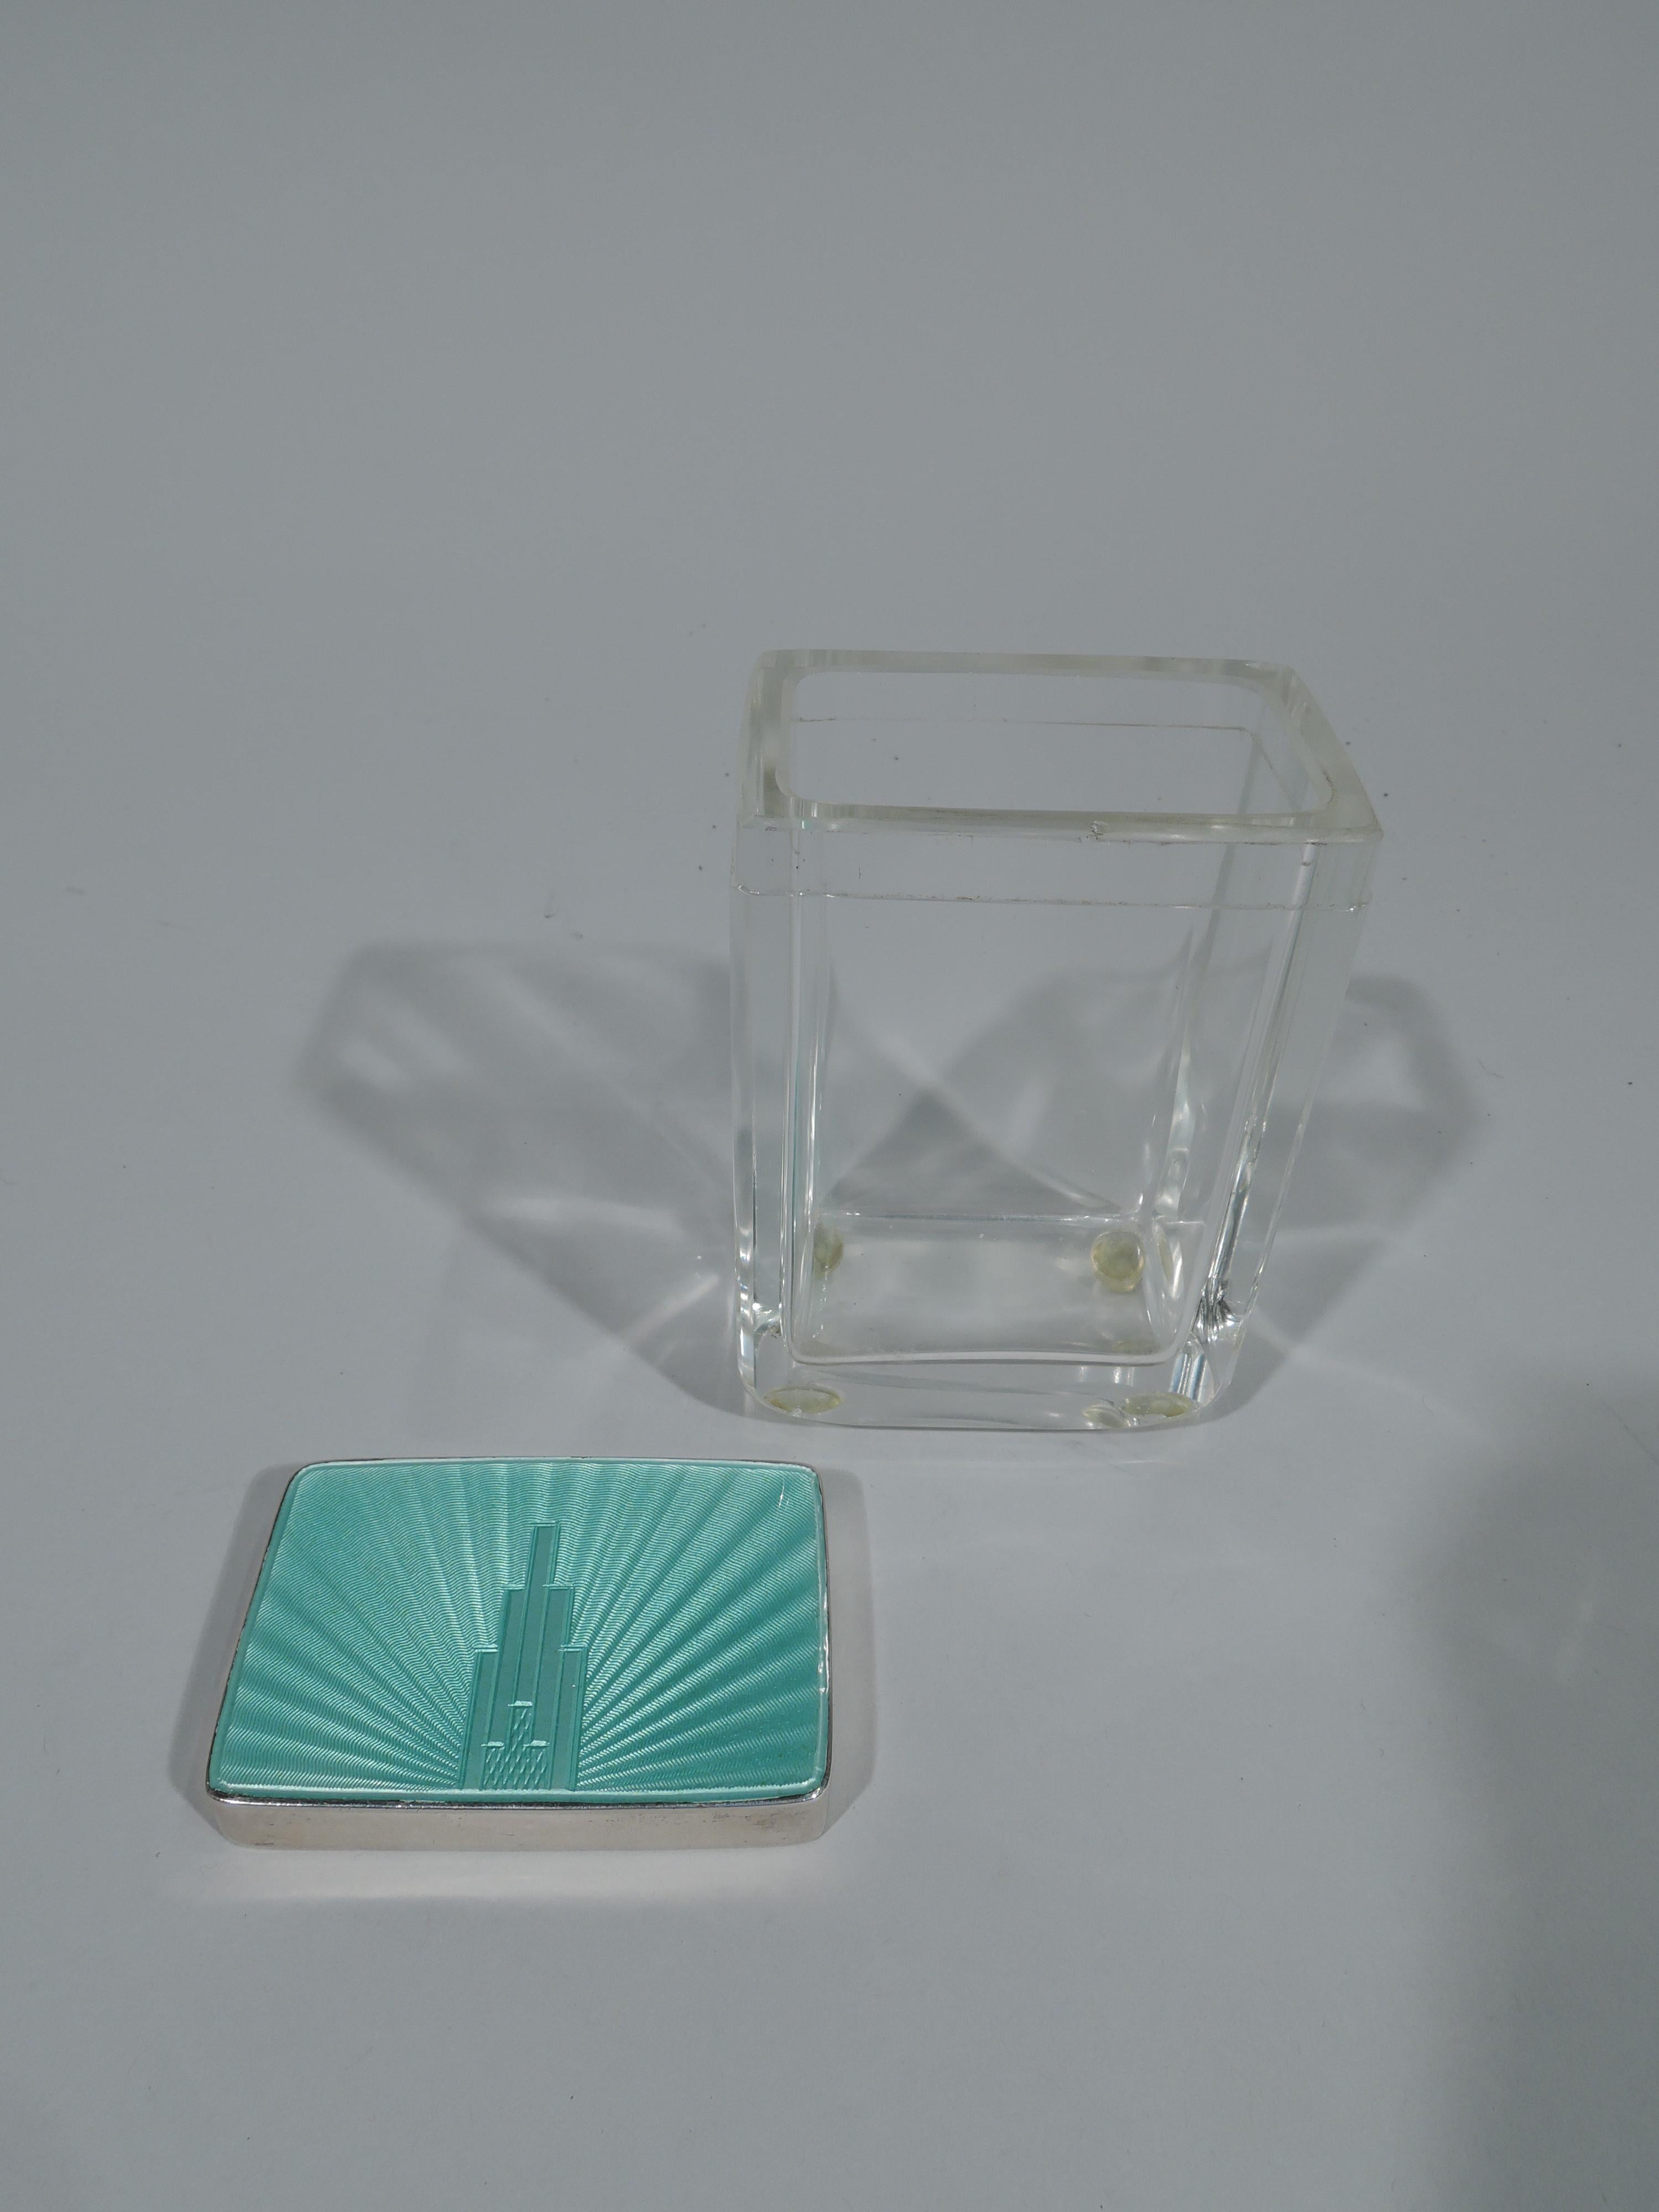 George V clear glass jar with sterling silver and enamel cover. Made by Henry Clifford Davis in Birmingham in 1933. Box is rectangular. Cover has green guilloche enamel top with skyscraper radiating shaded lines. The cover sides are silver. Smart